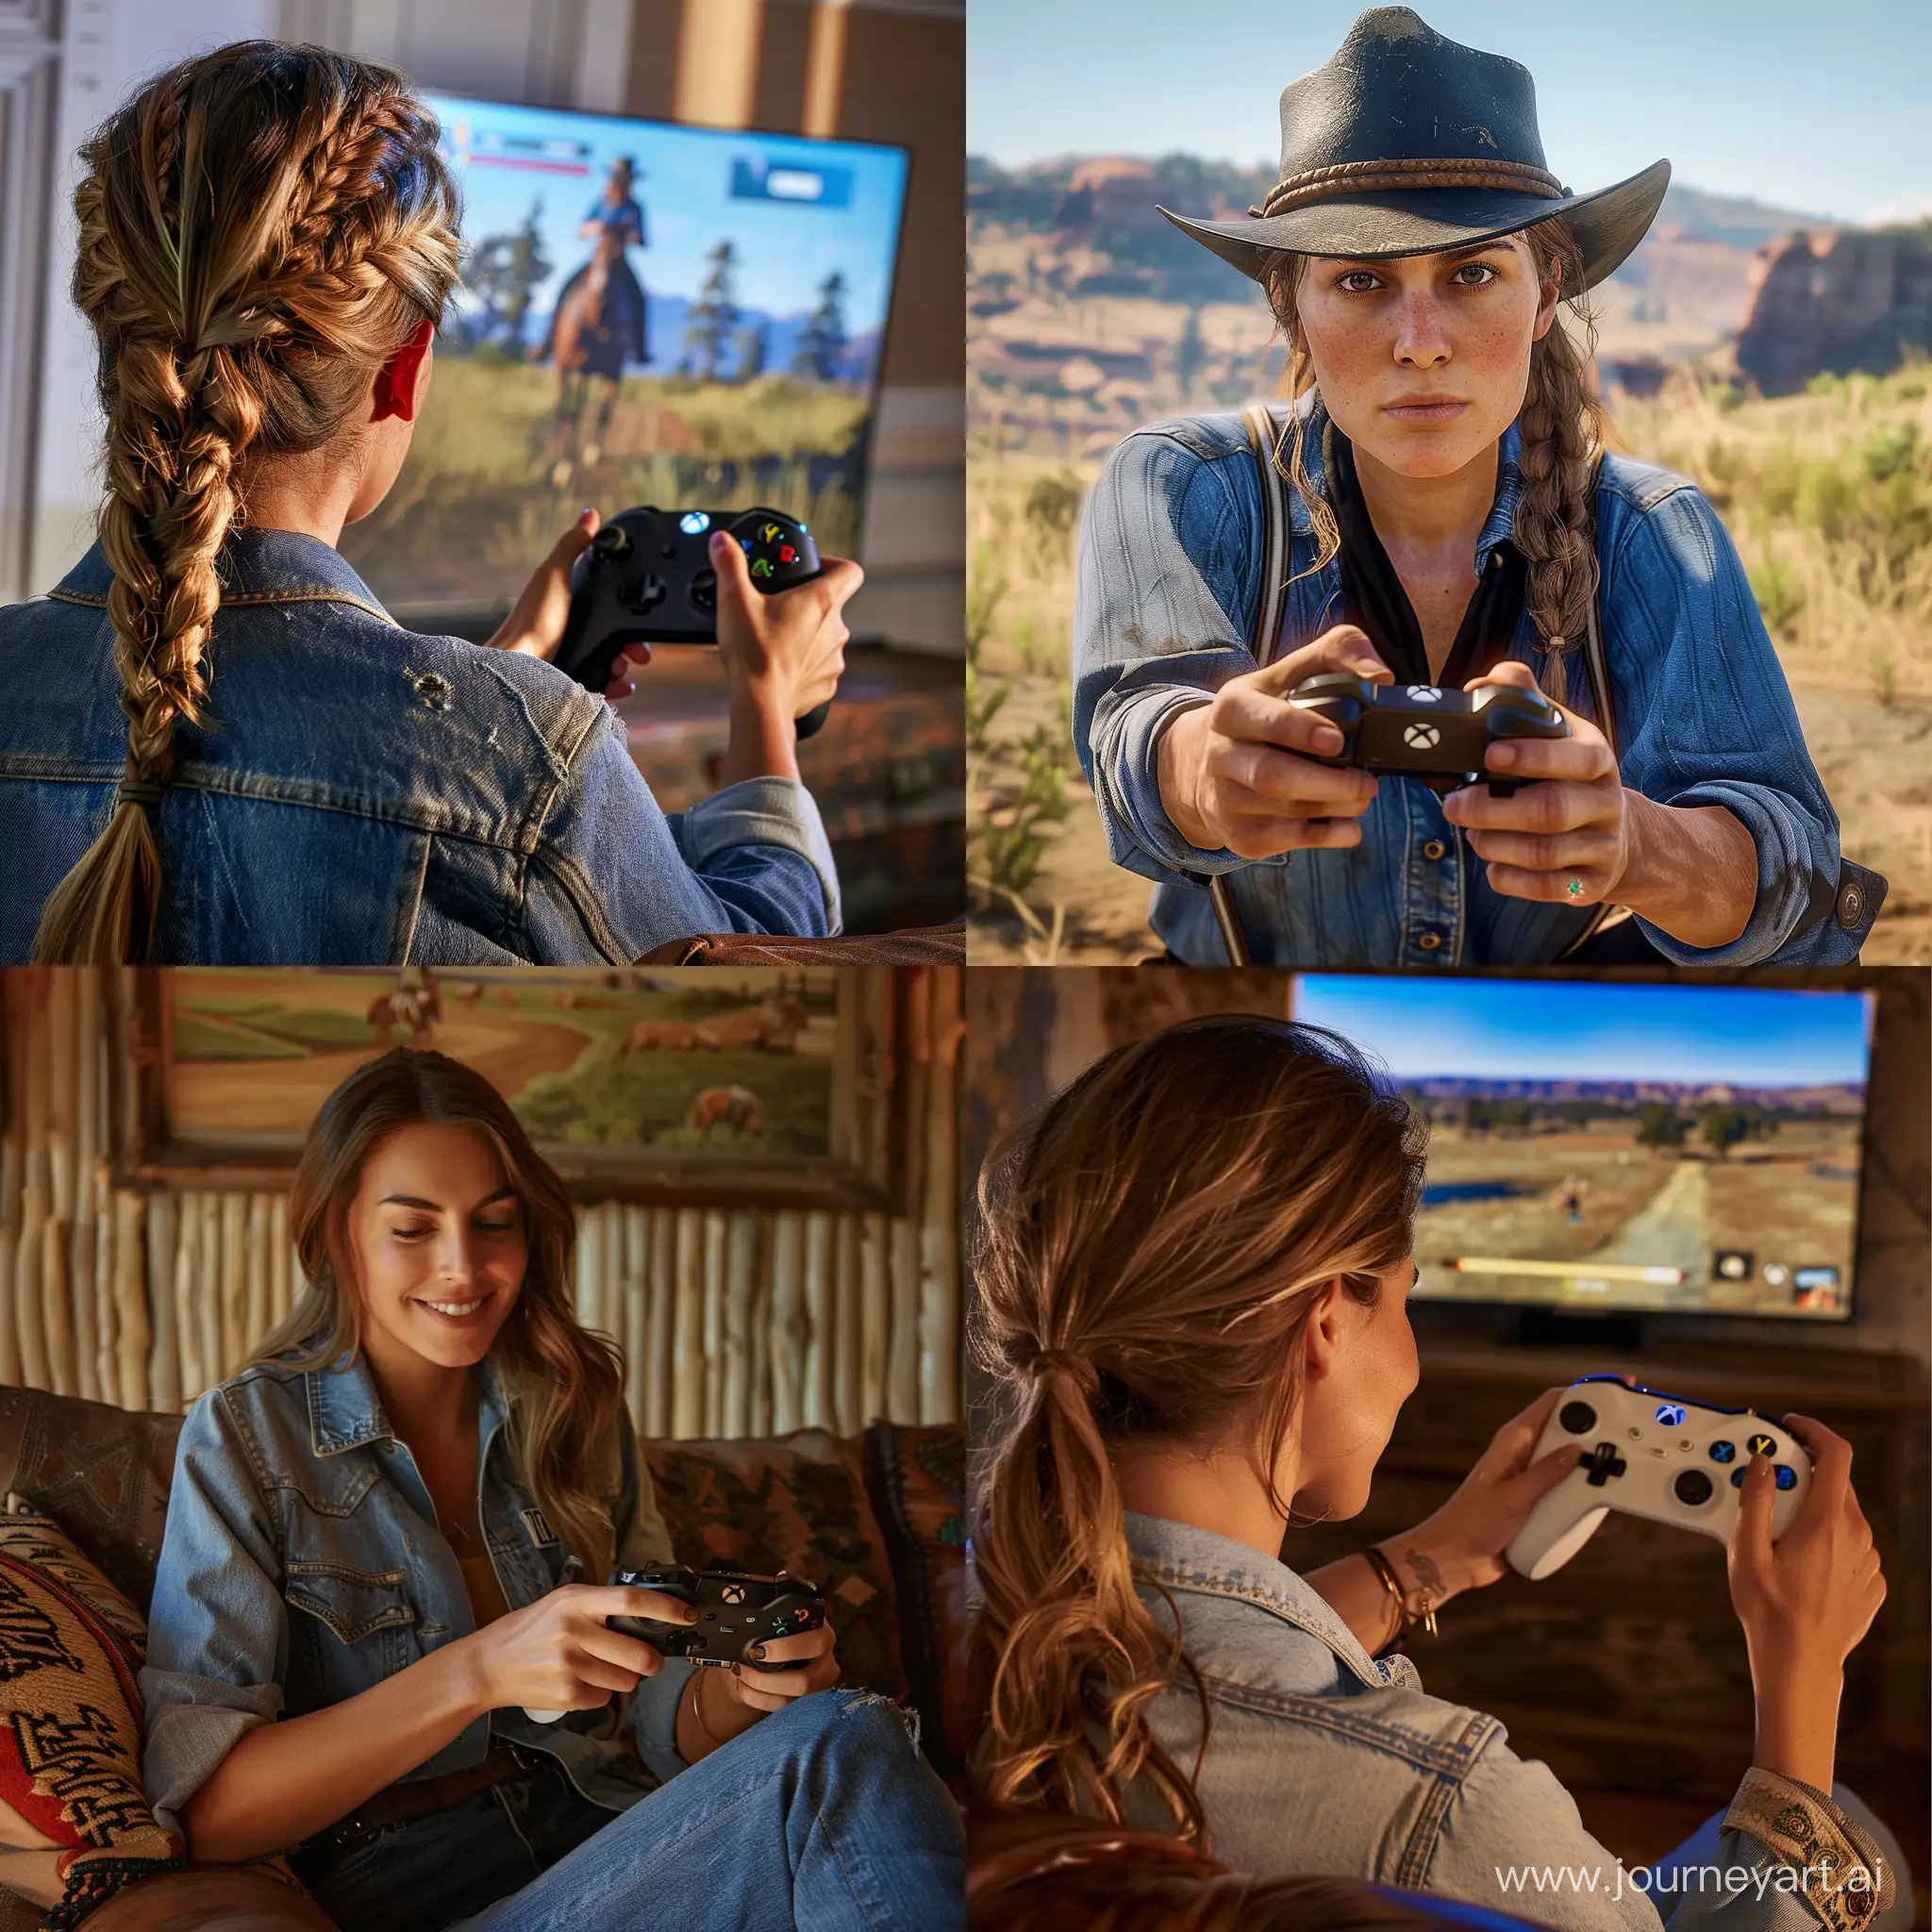 A woman, playing Xbox One, the game Played by her is red dead redemption 2 